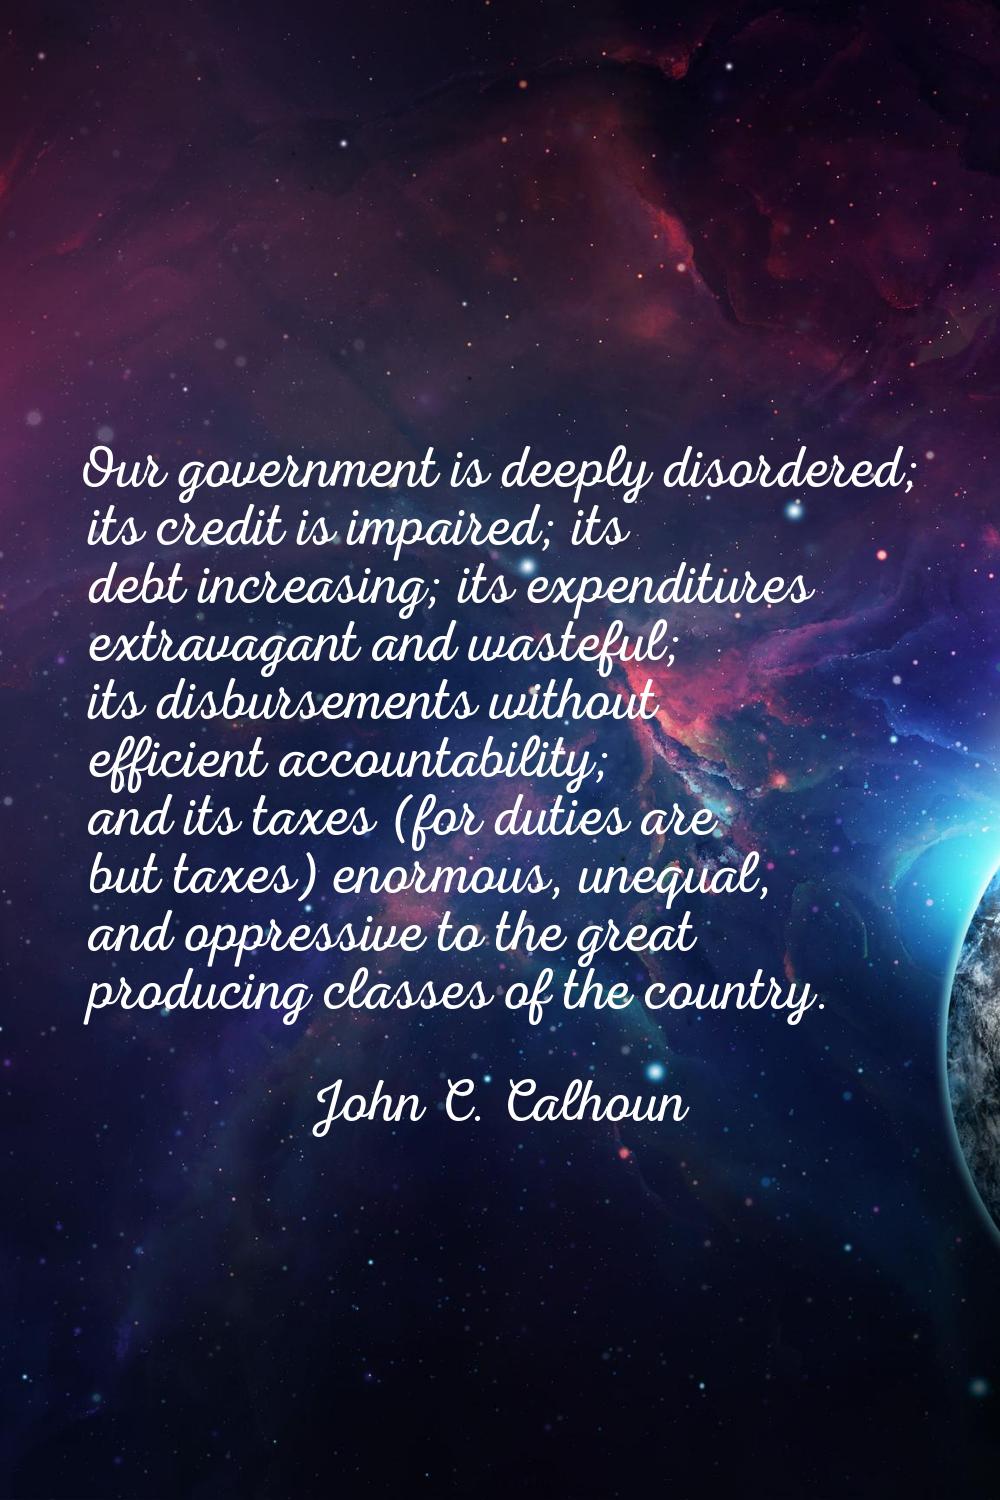 Our government is deeply disordered; its credit is impaired; its debt increasing; its expenditures 